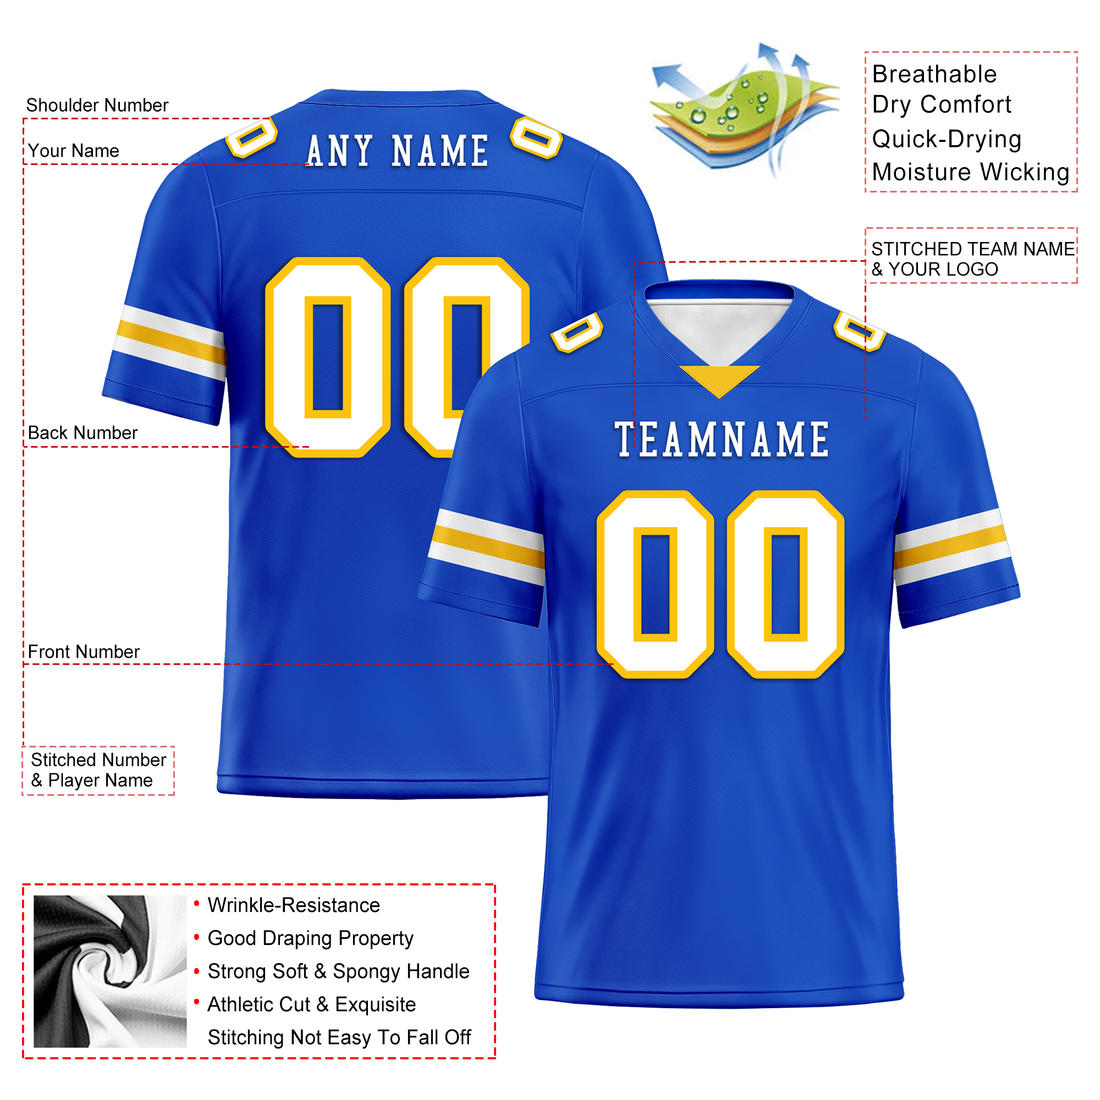 Custom Blue Classic Style Personalized Authentic Football Jersey FBJ02-bd0a70bb